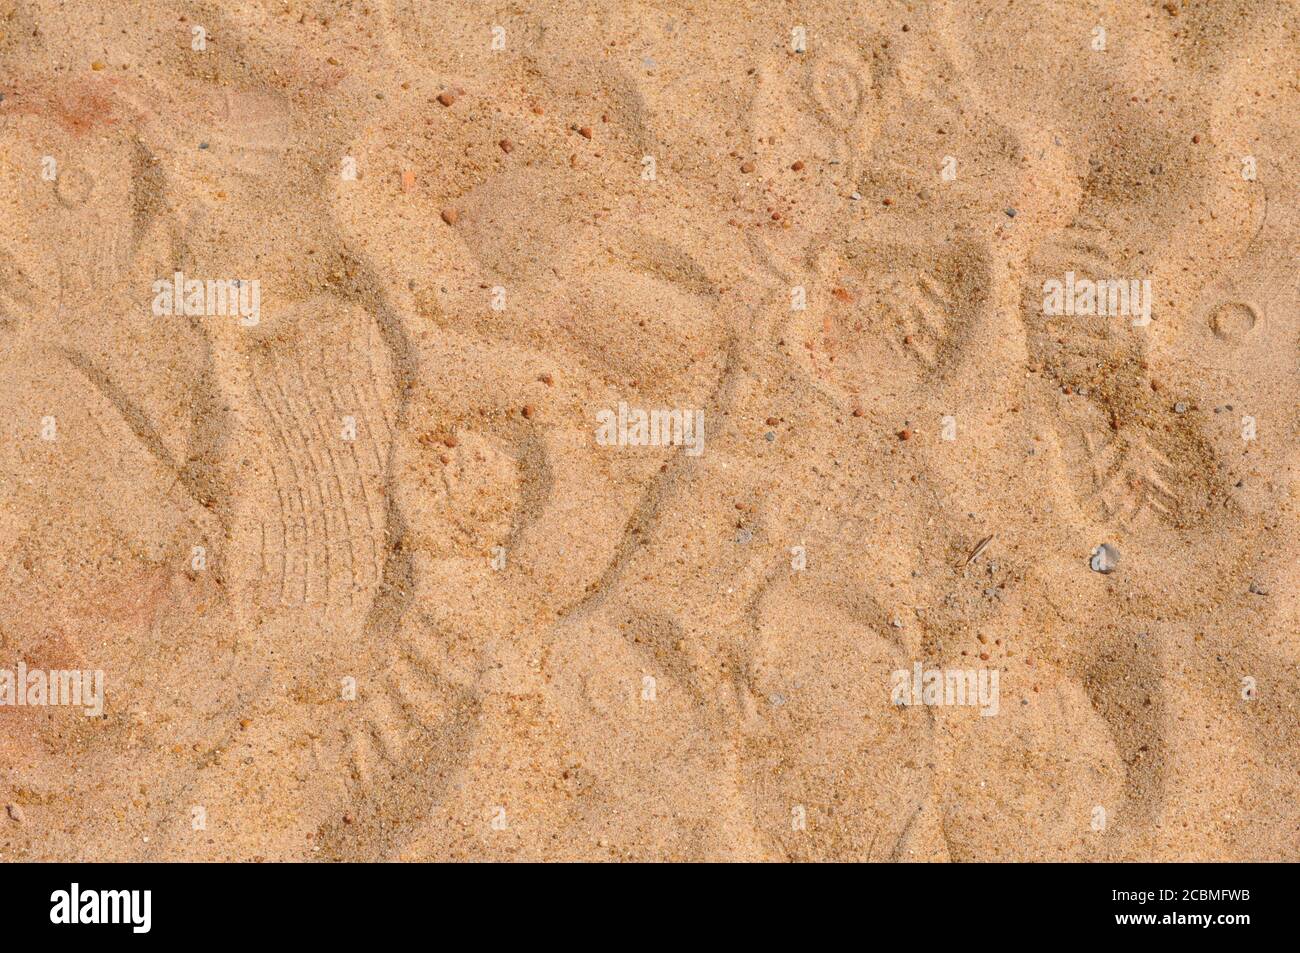 Sand. Beach or river sand used in civil construction, zoom photo, texture style, scene or abstract background, color photo, Brazil, South America Stock Photo